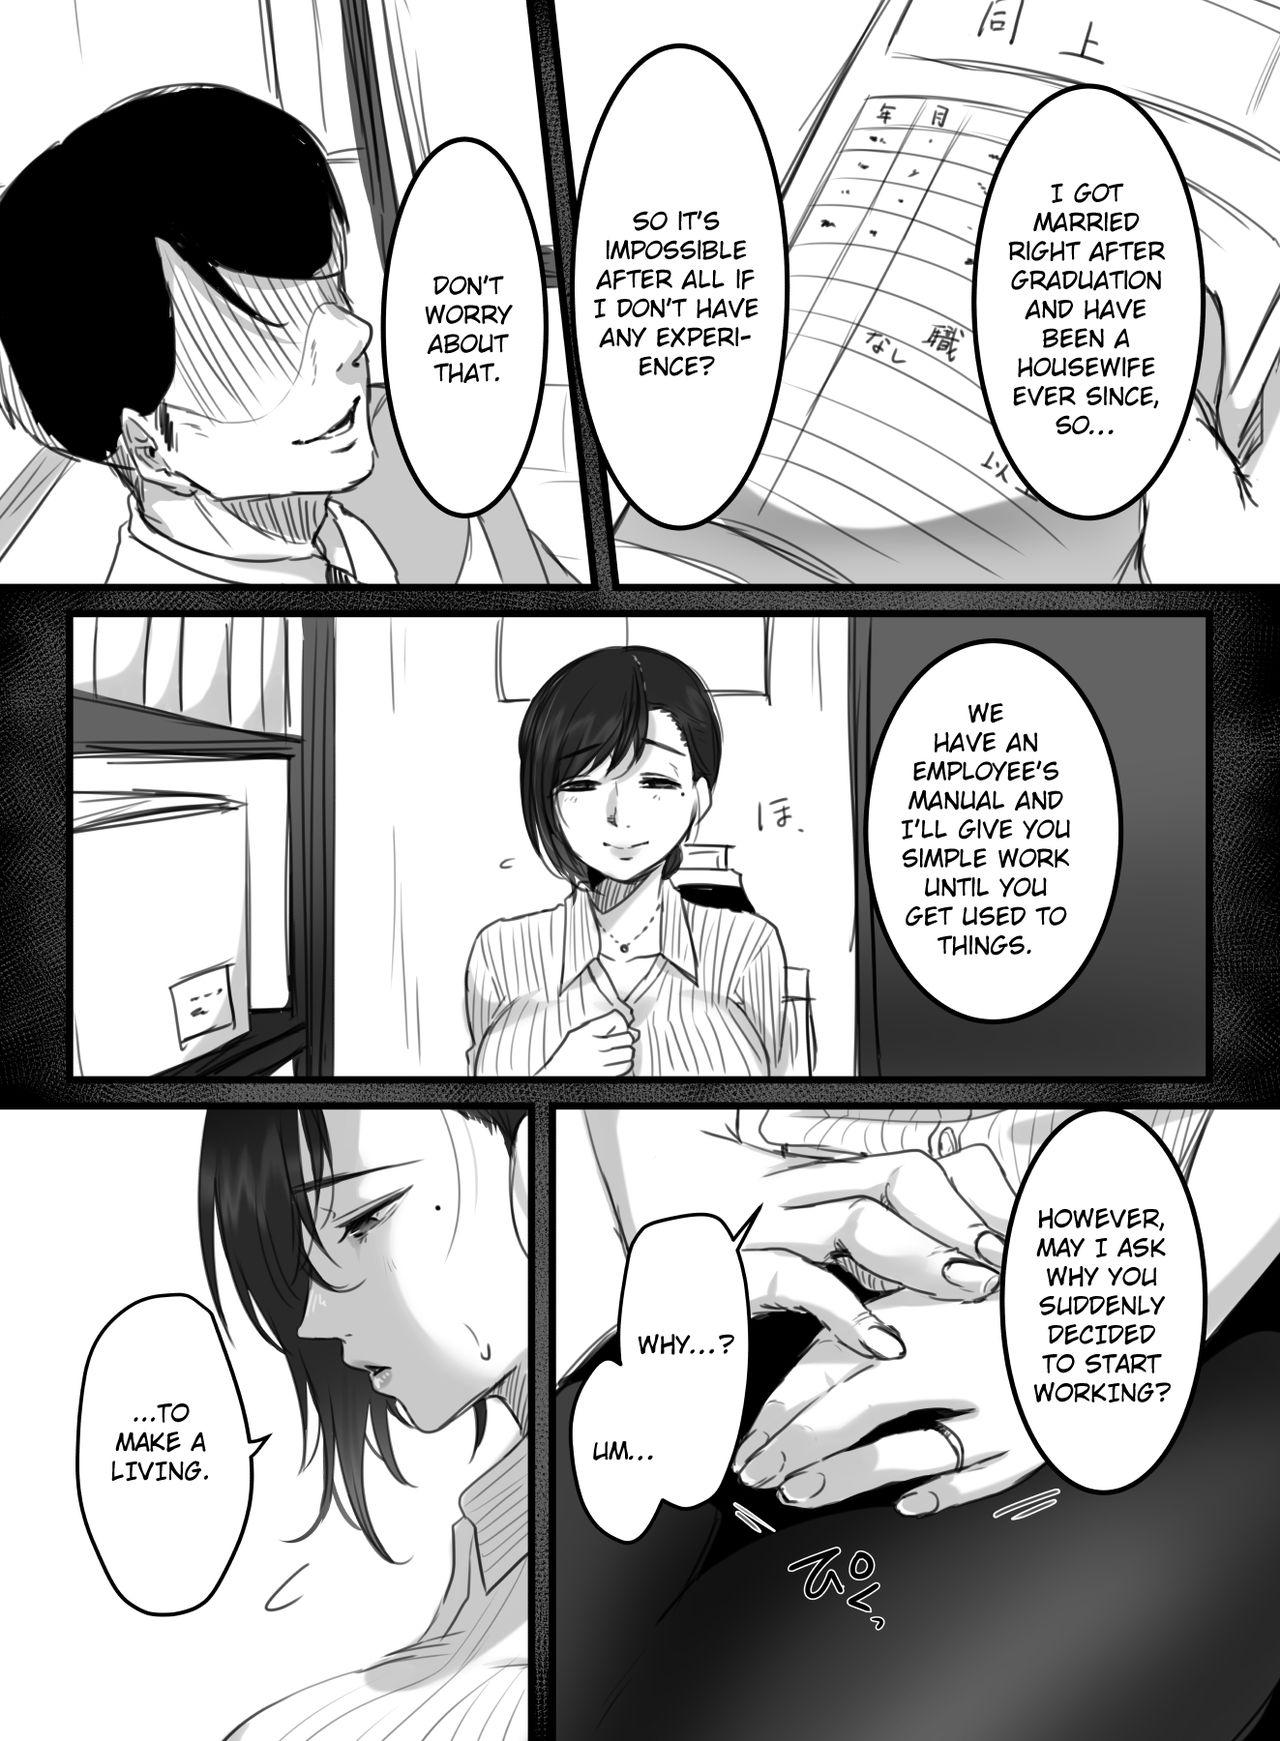 Publico Re: 15-fun no Zangyou | Re: 15 Minutes of Overtime - Original Animated - Page 7